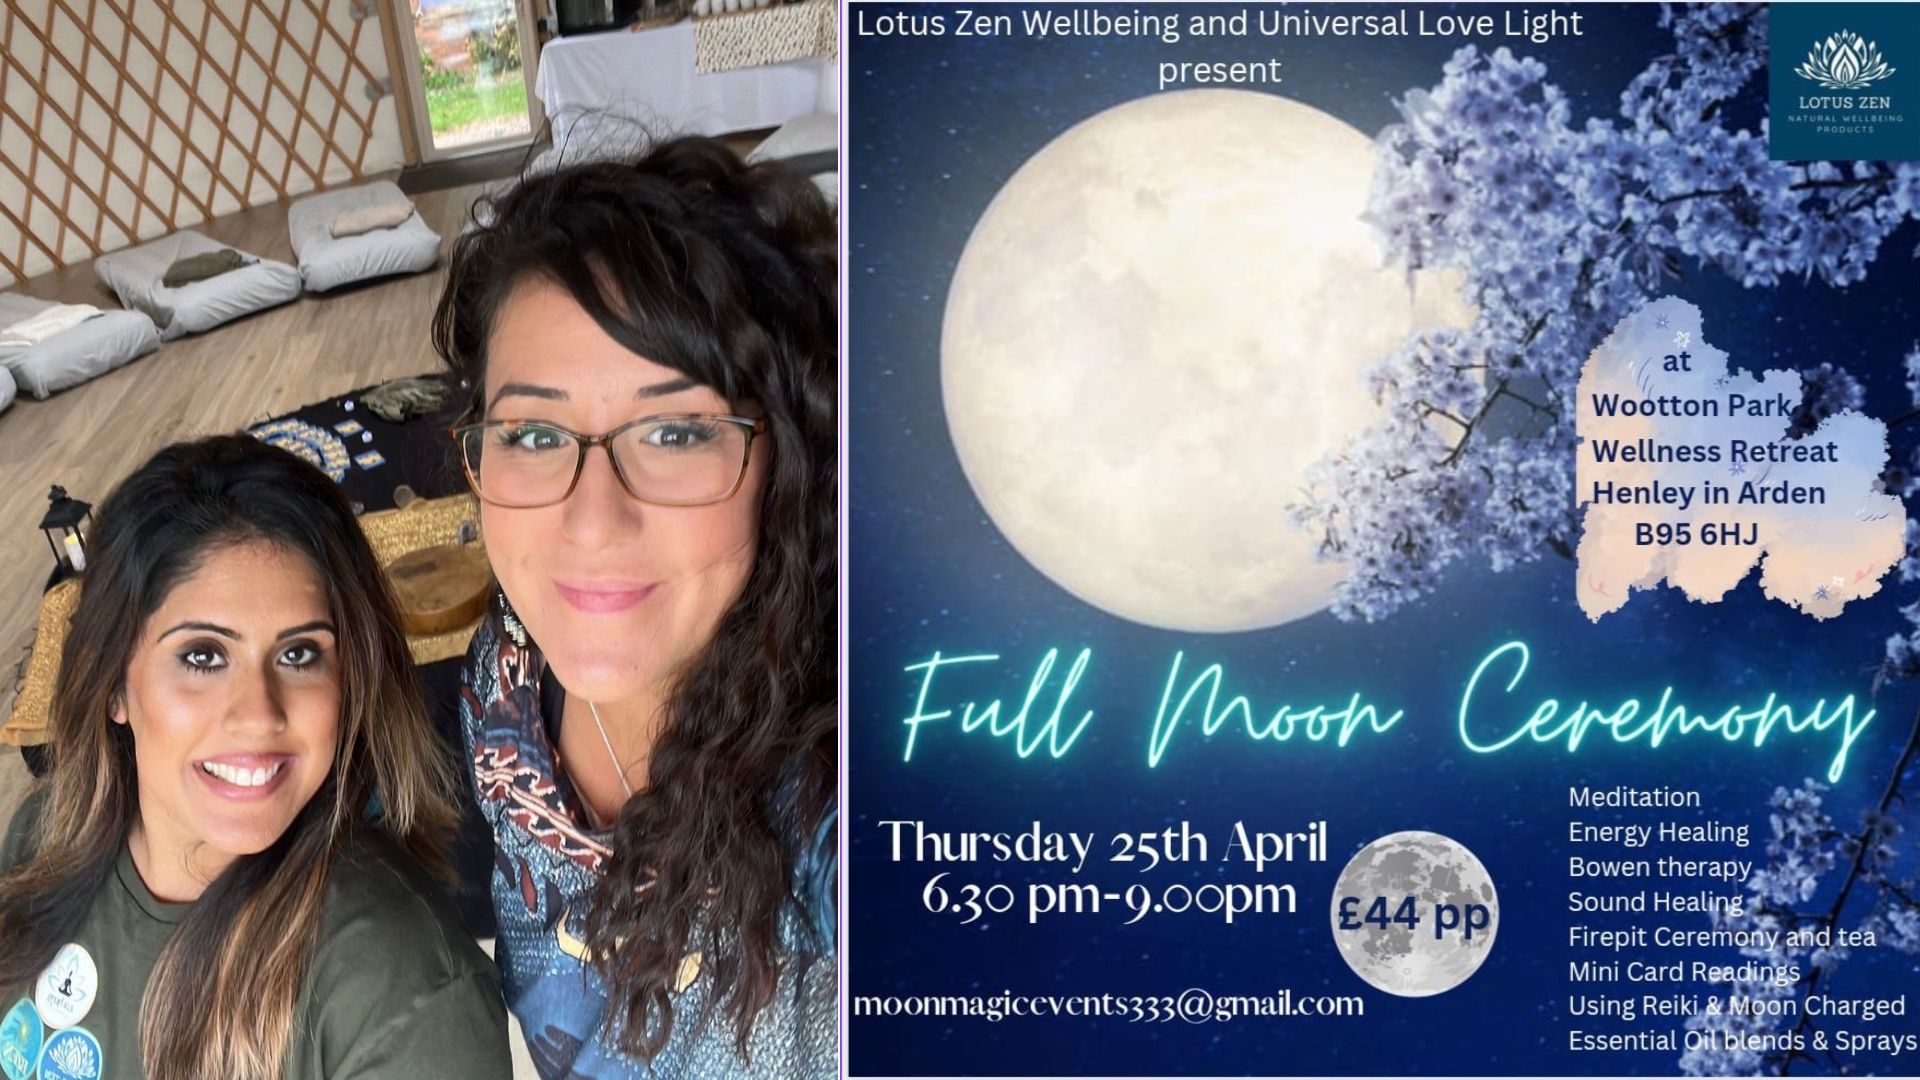 Full Moon Ceremony Evening with Universal Love Light & Lotus Zen Wellbeing, April 2024